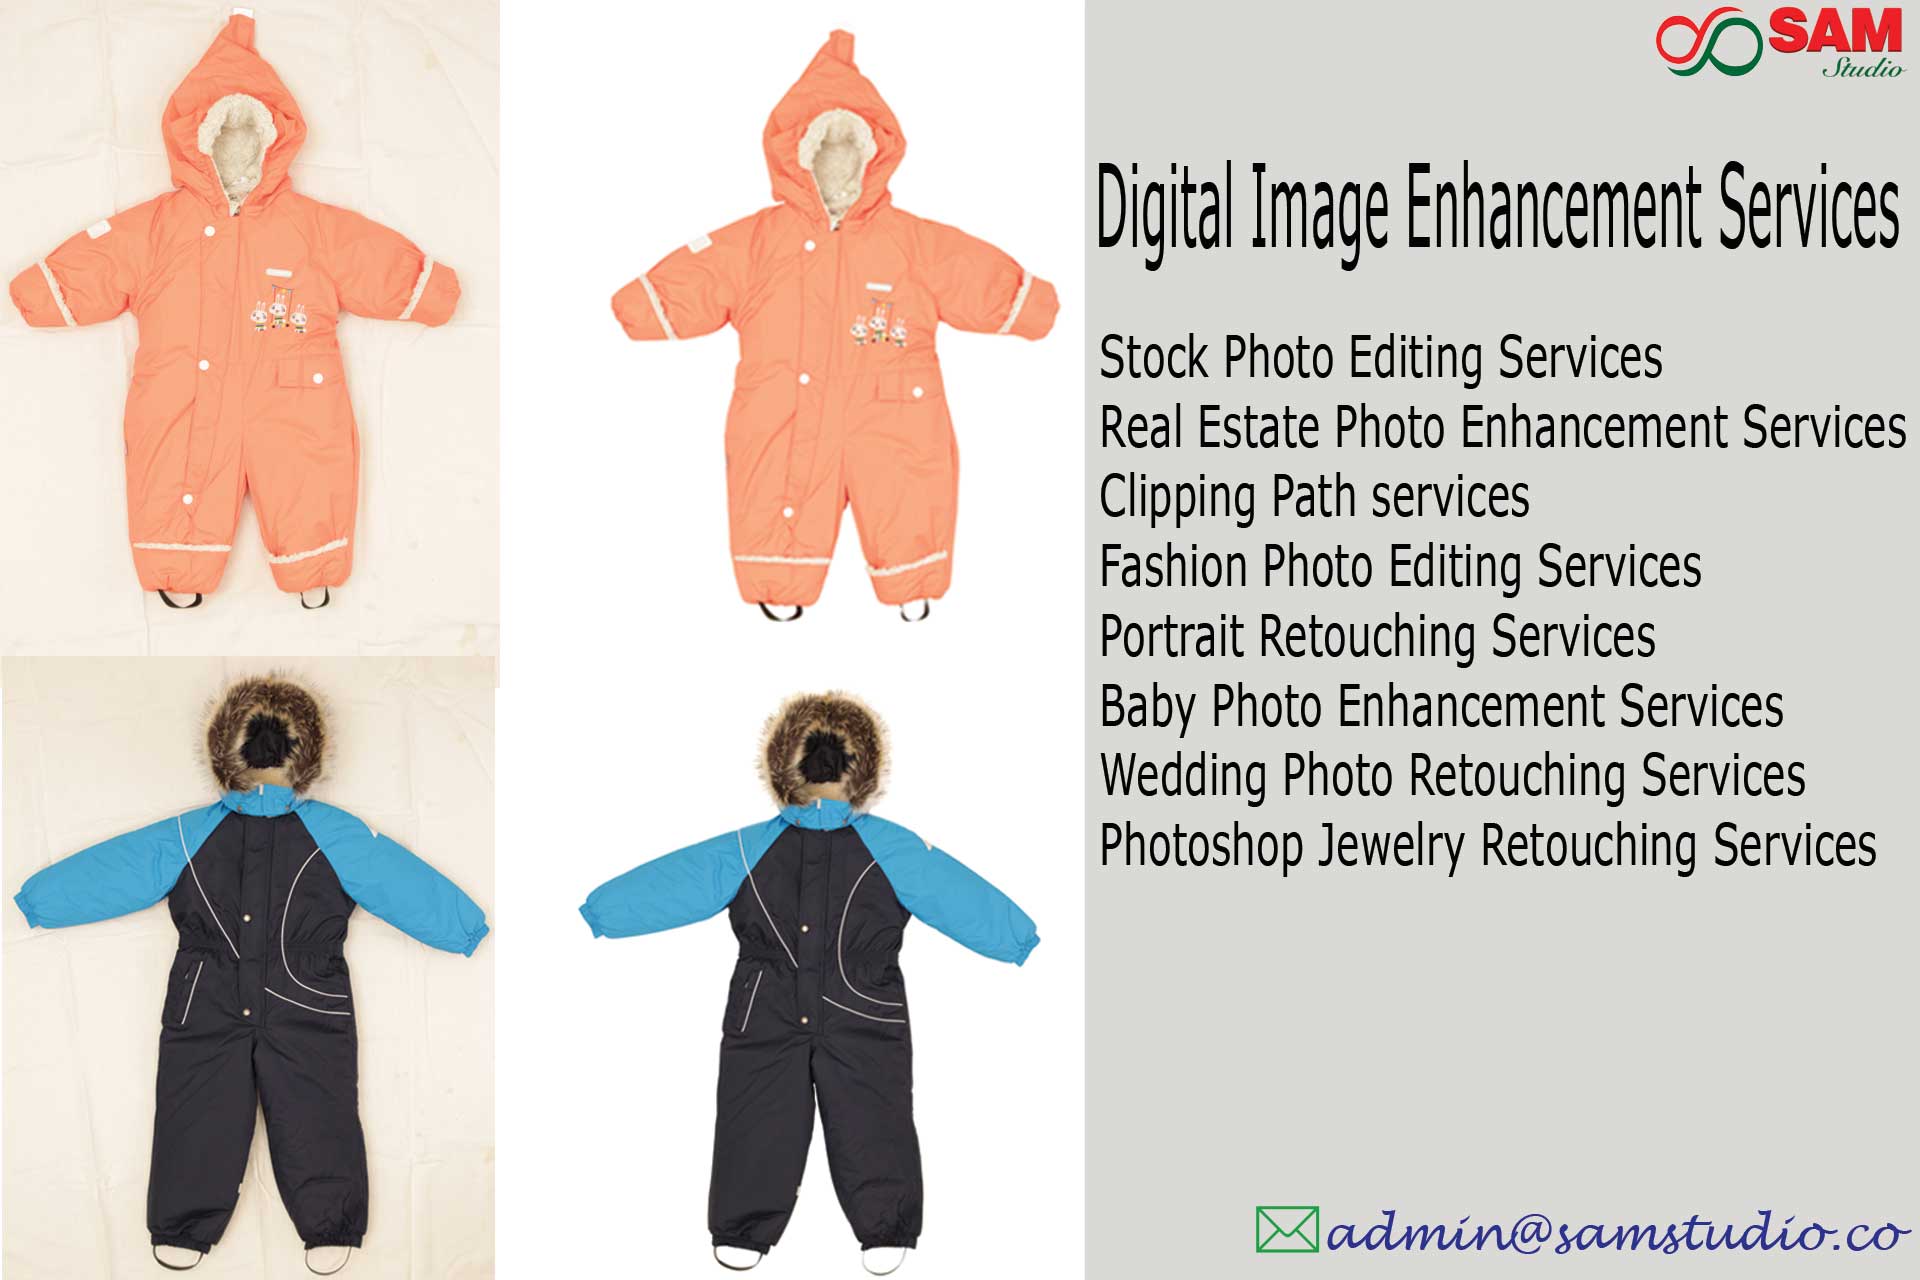 High-End Image Enhancement Services | Digital Photo Editing Services